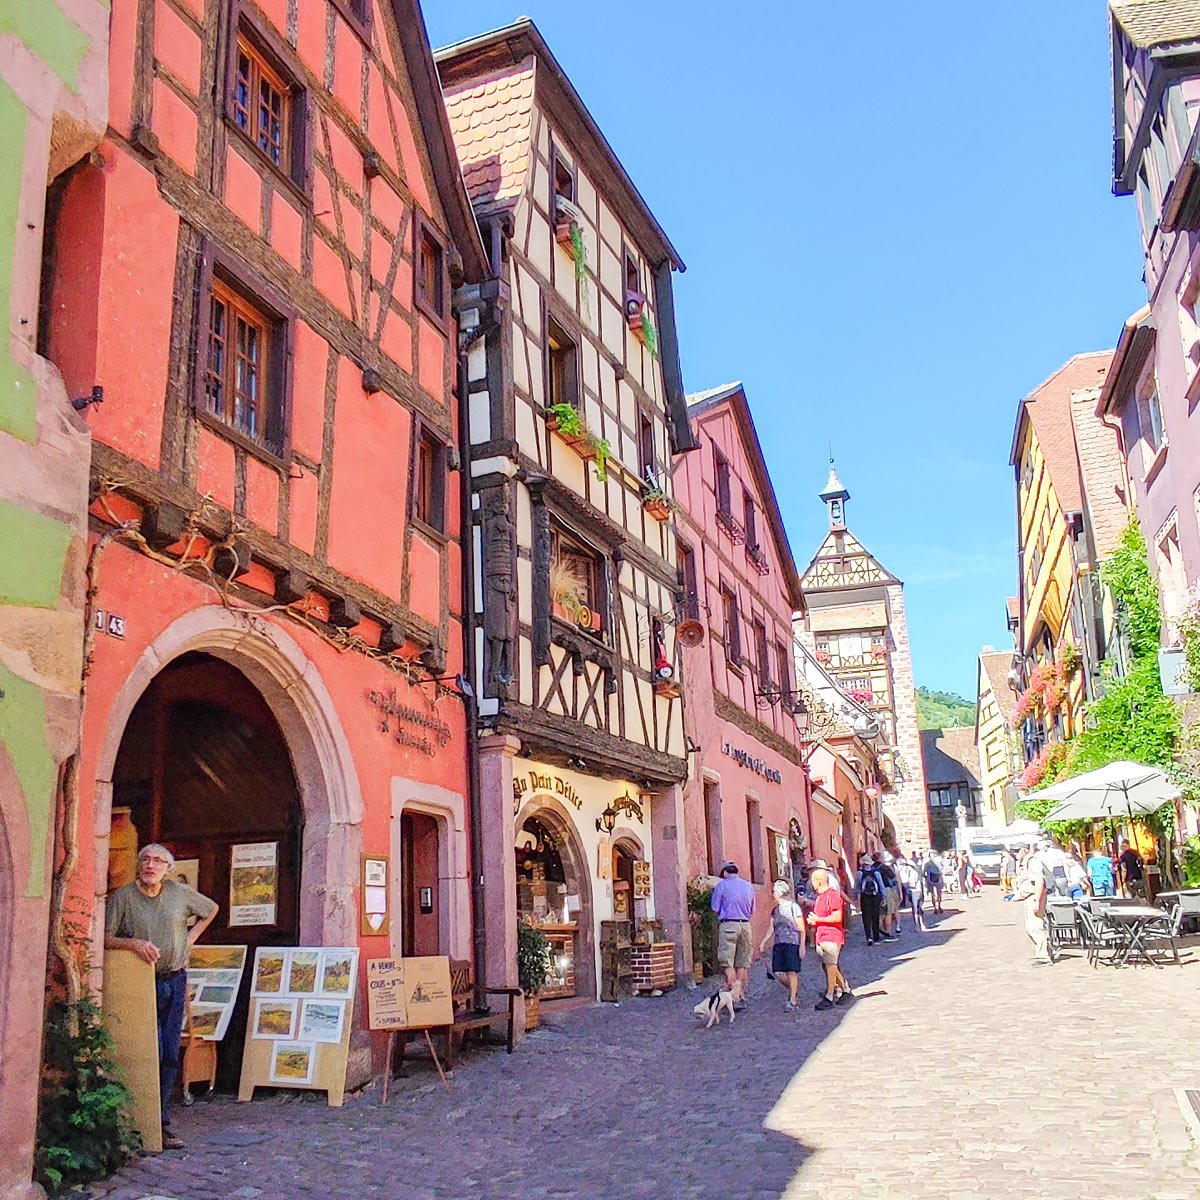 8 Top Things to do in Riquewihr France